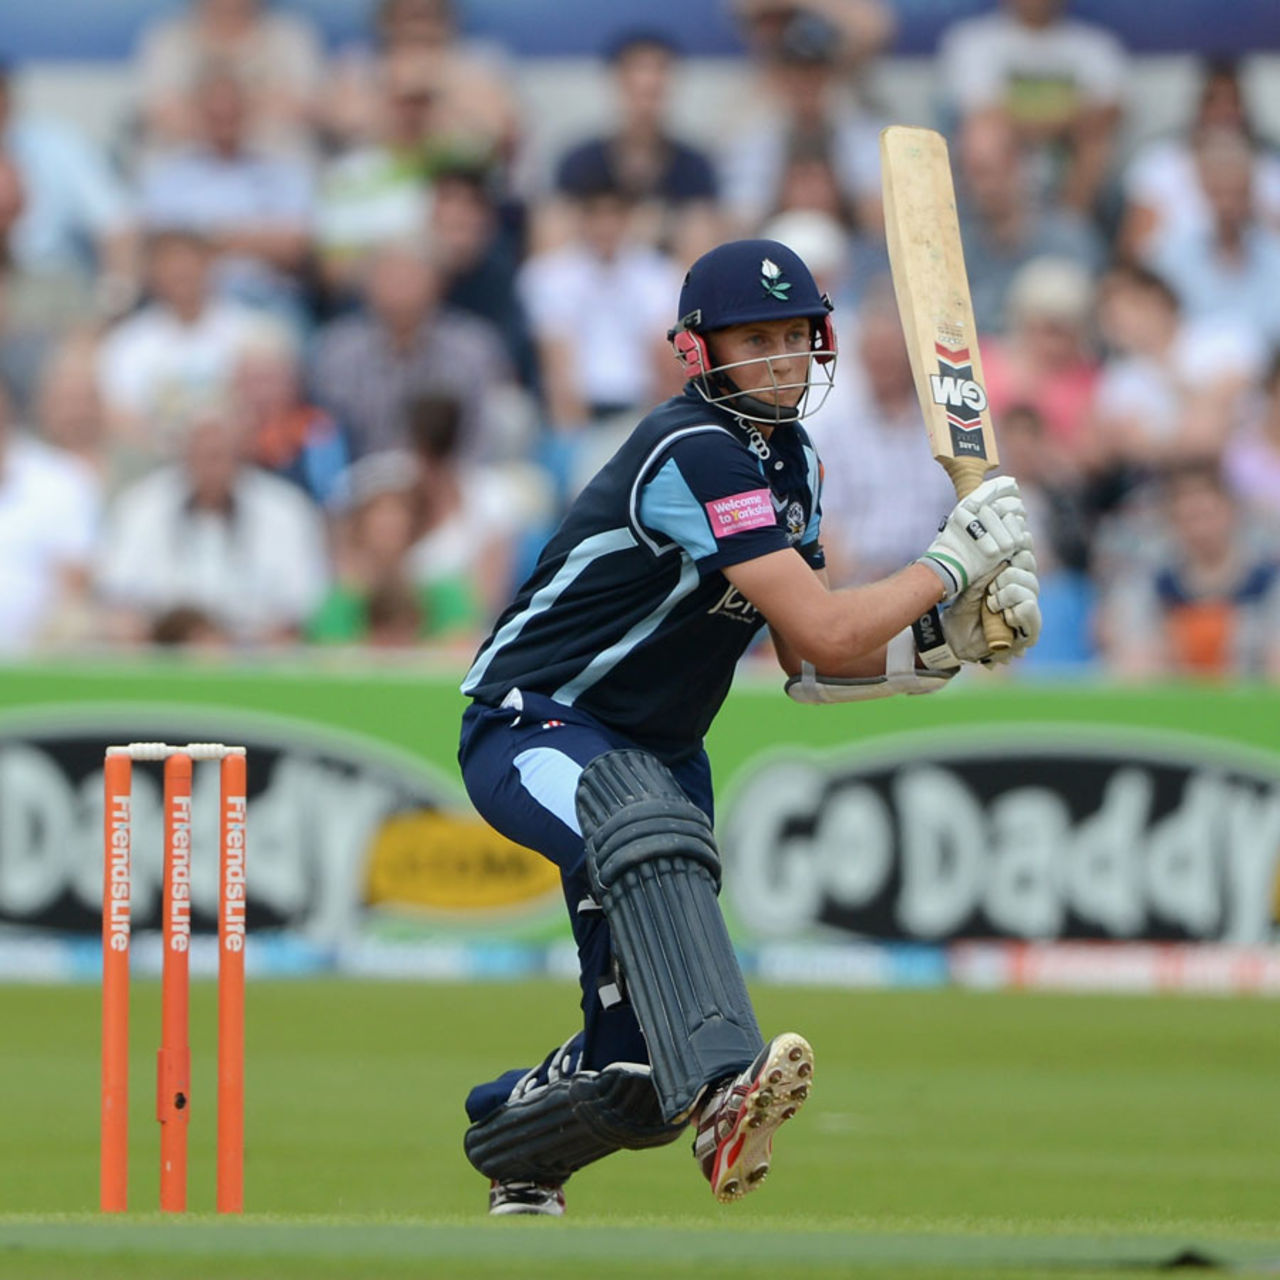 Joe Root gets ready to reverse sweep on his way to 65 off 40 balls, Yorkshire v Worcestershire, FLt20 quarter-final, Headingley, July 25, 2012